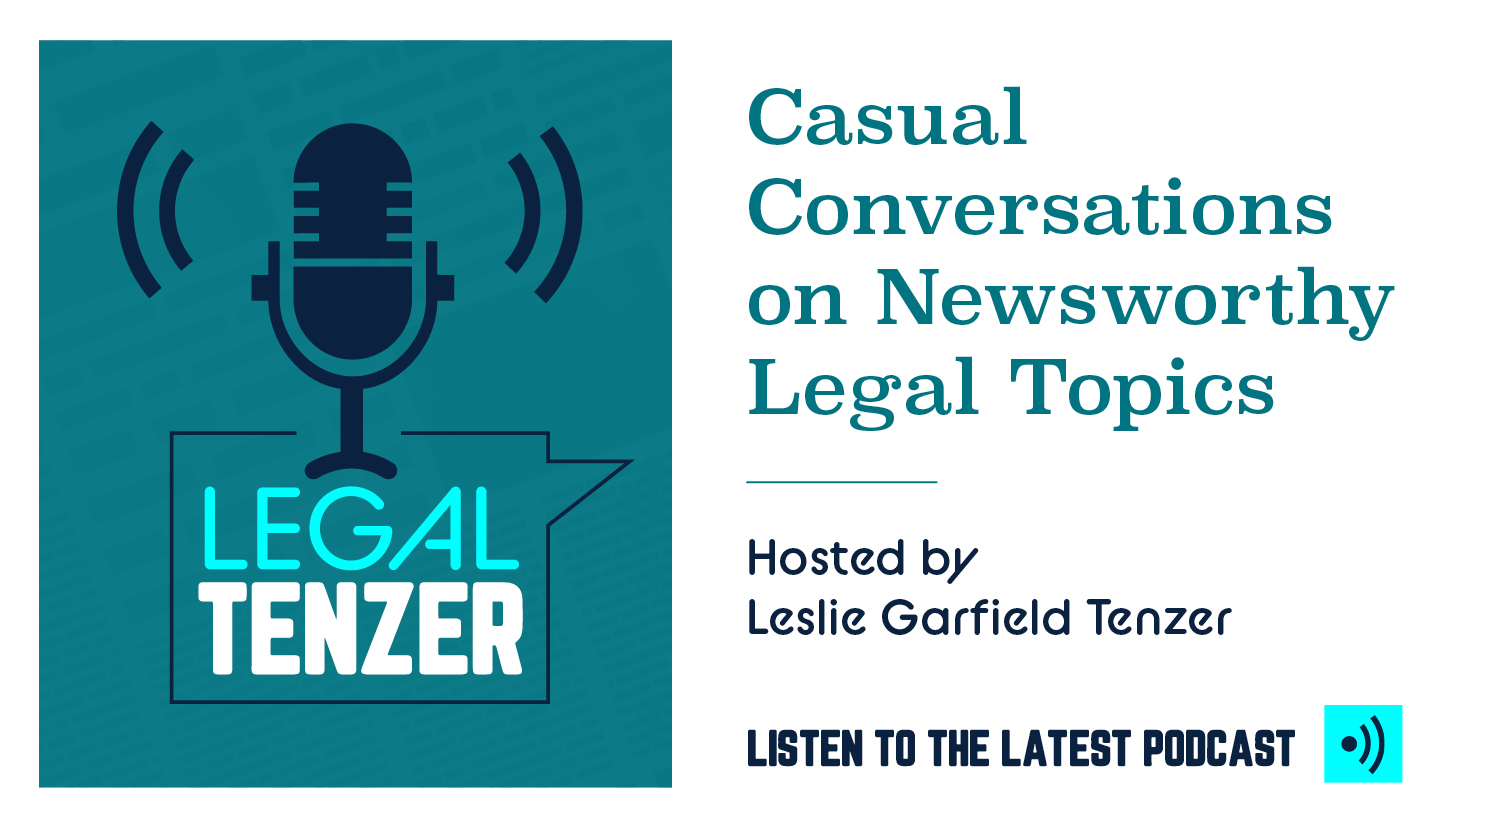 Casual Conversations on Newsworthy Legal Topics. Listen to the latest podcast.